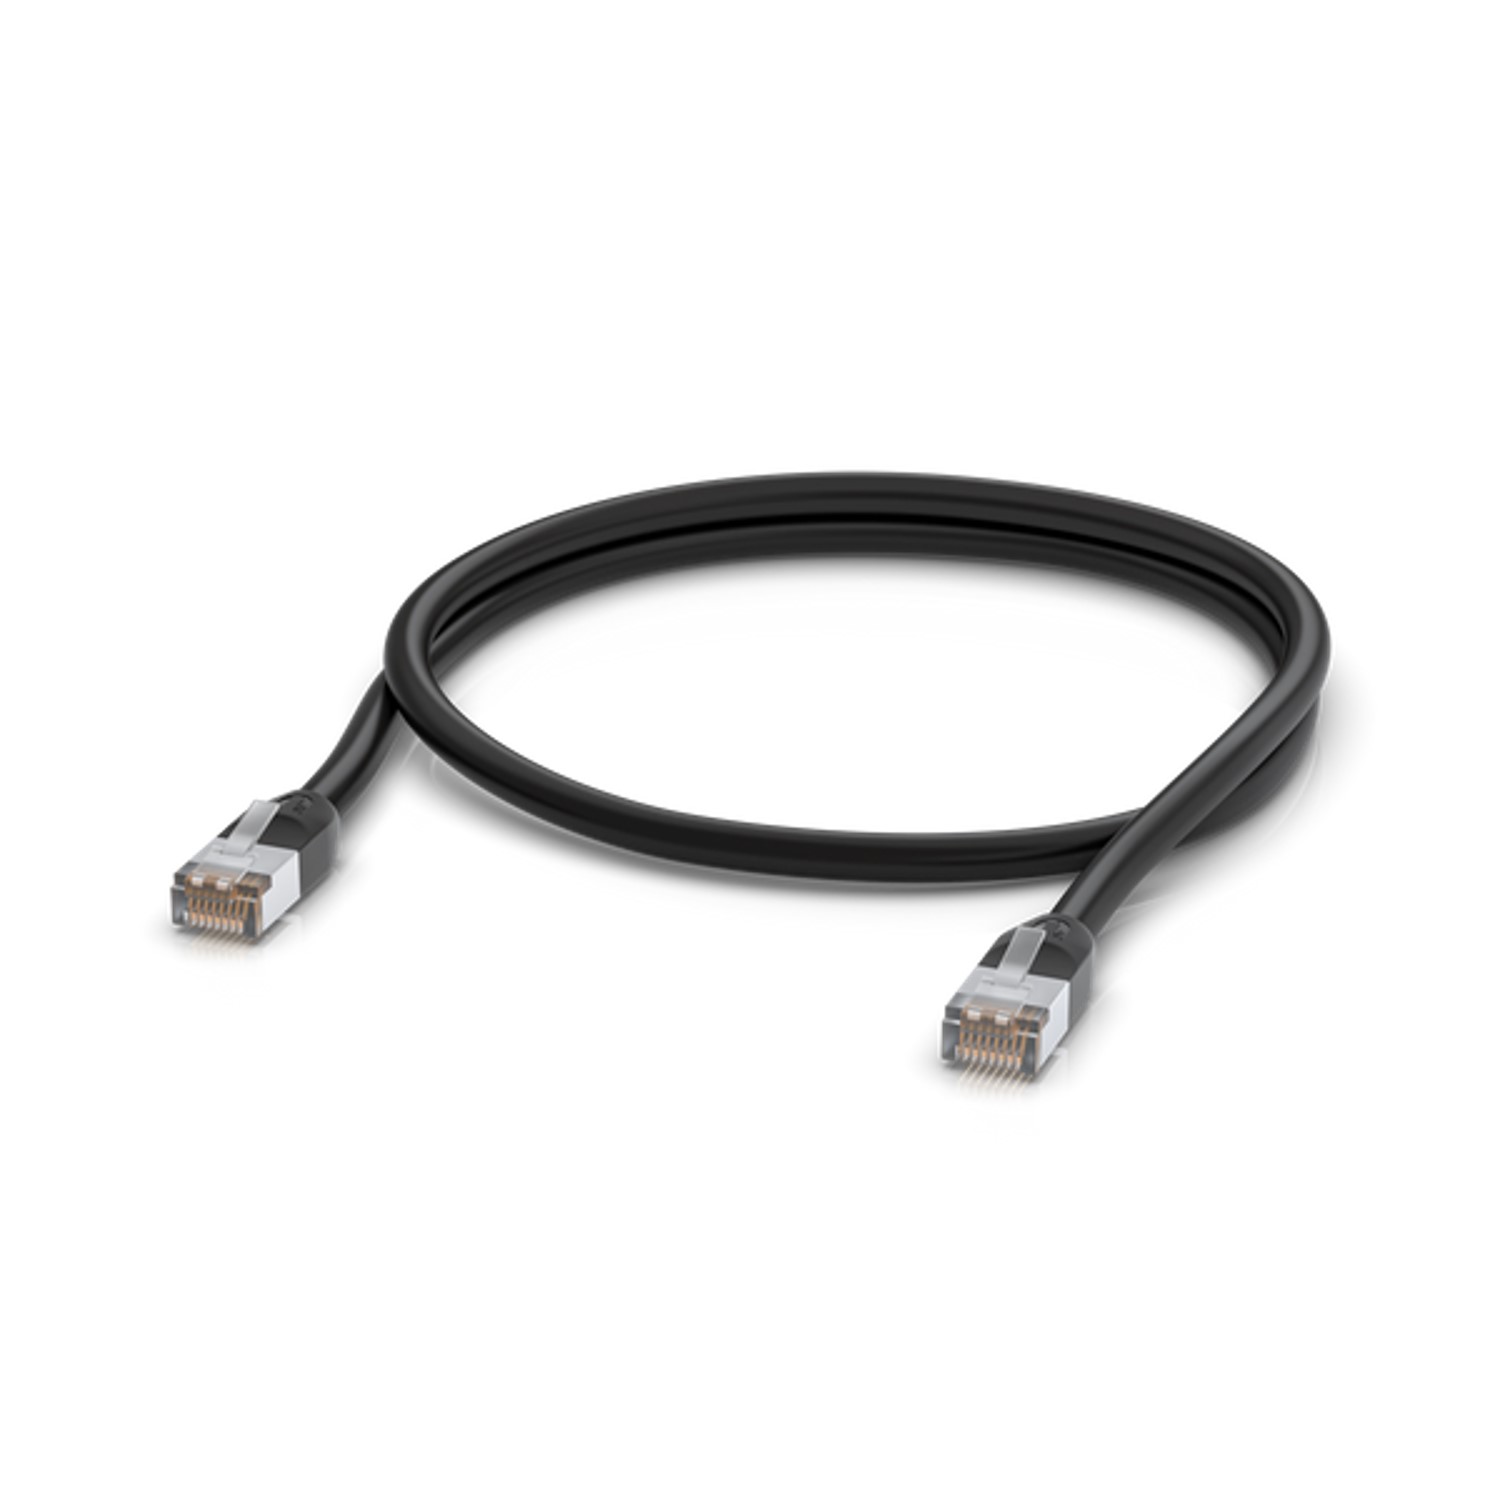 UACC-Cable-Patch-Outdoor-2M-BK | 2m Grounded, External CAT5e